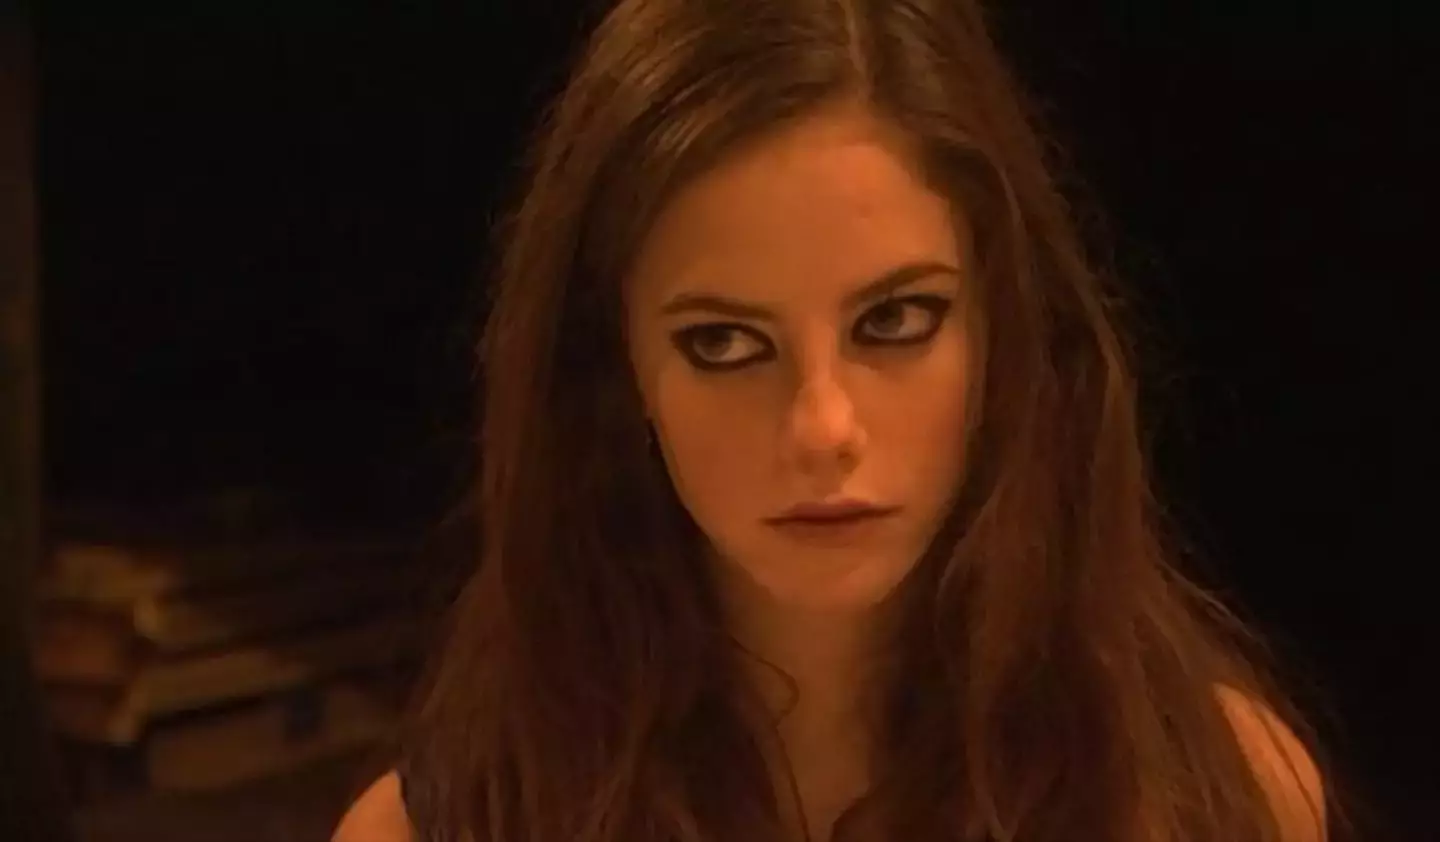 You'll remember her as Effy from Skins, though she's done a lot since then.